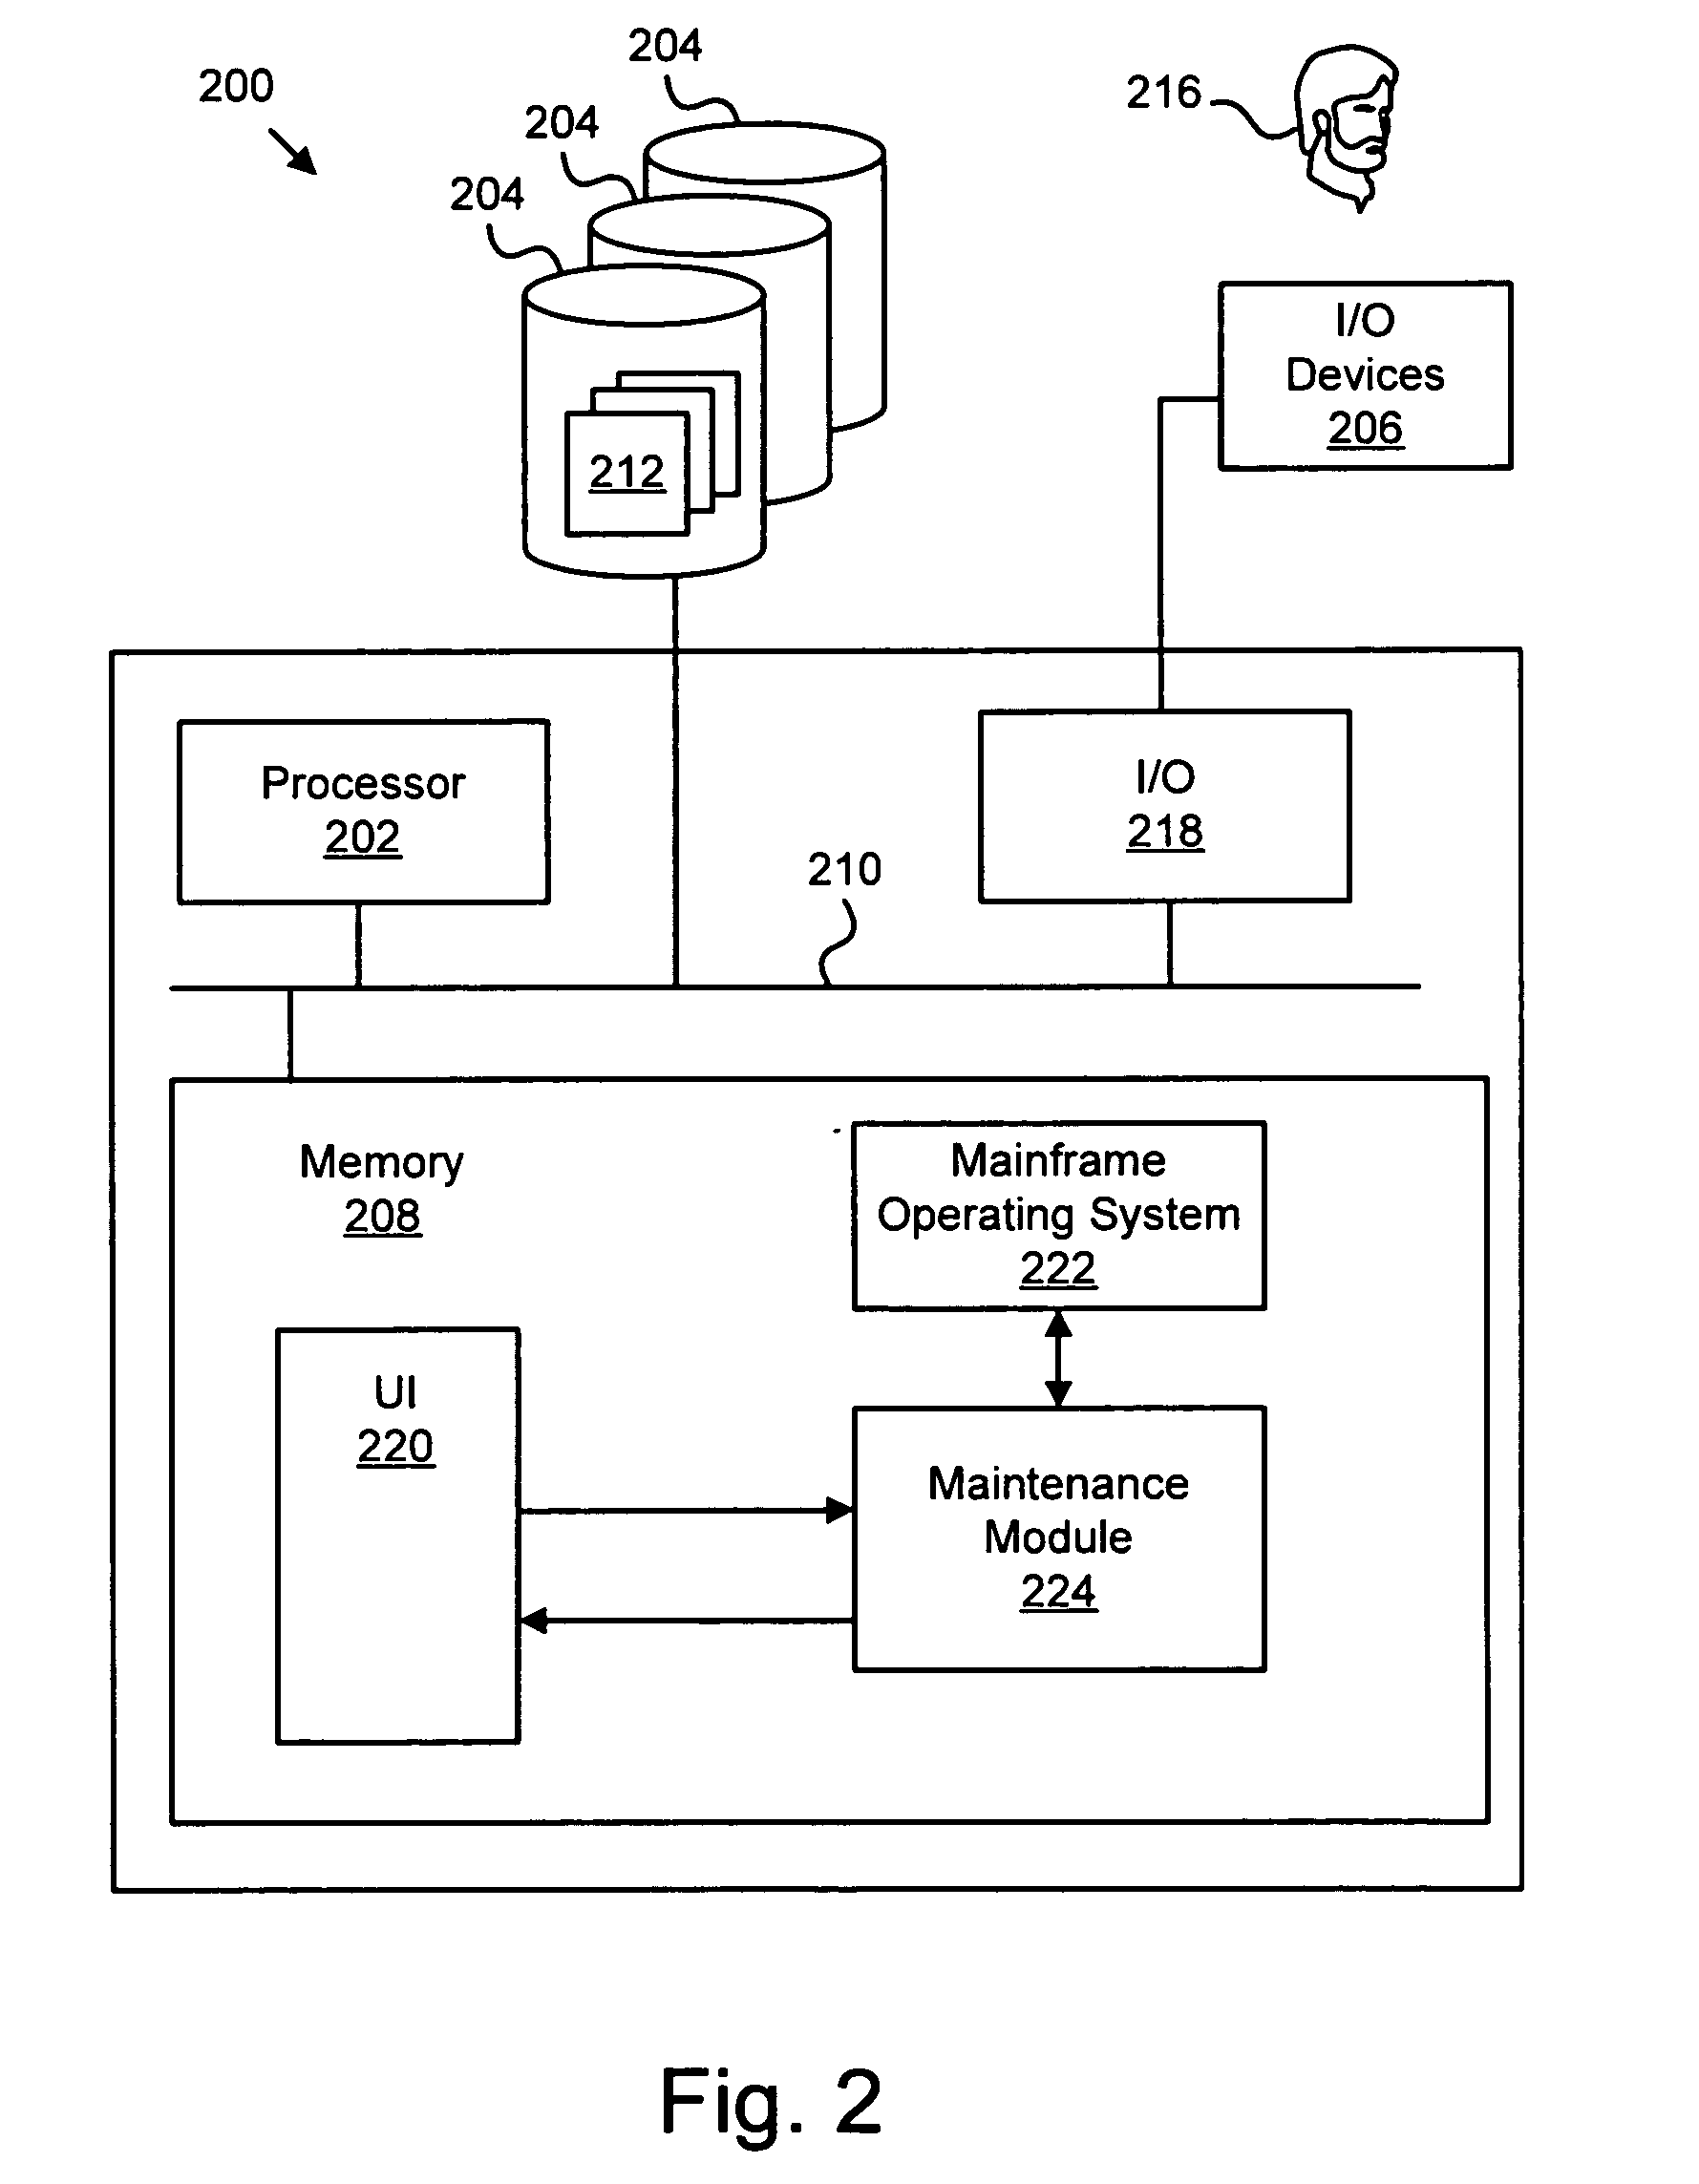 Apparatus, system, and method for performing semi-automatic dataset maintenance